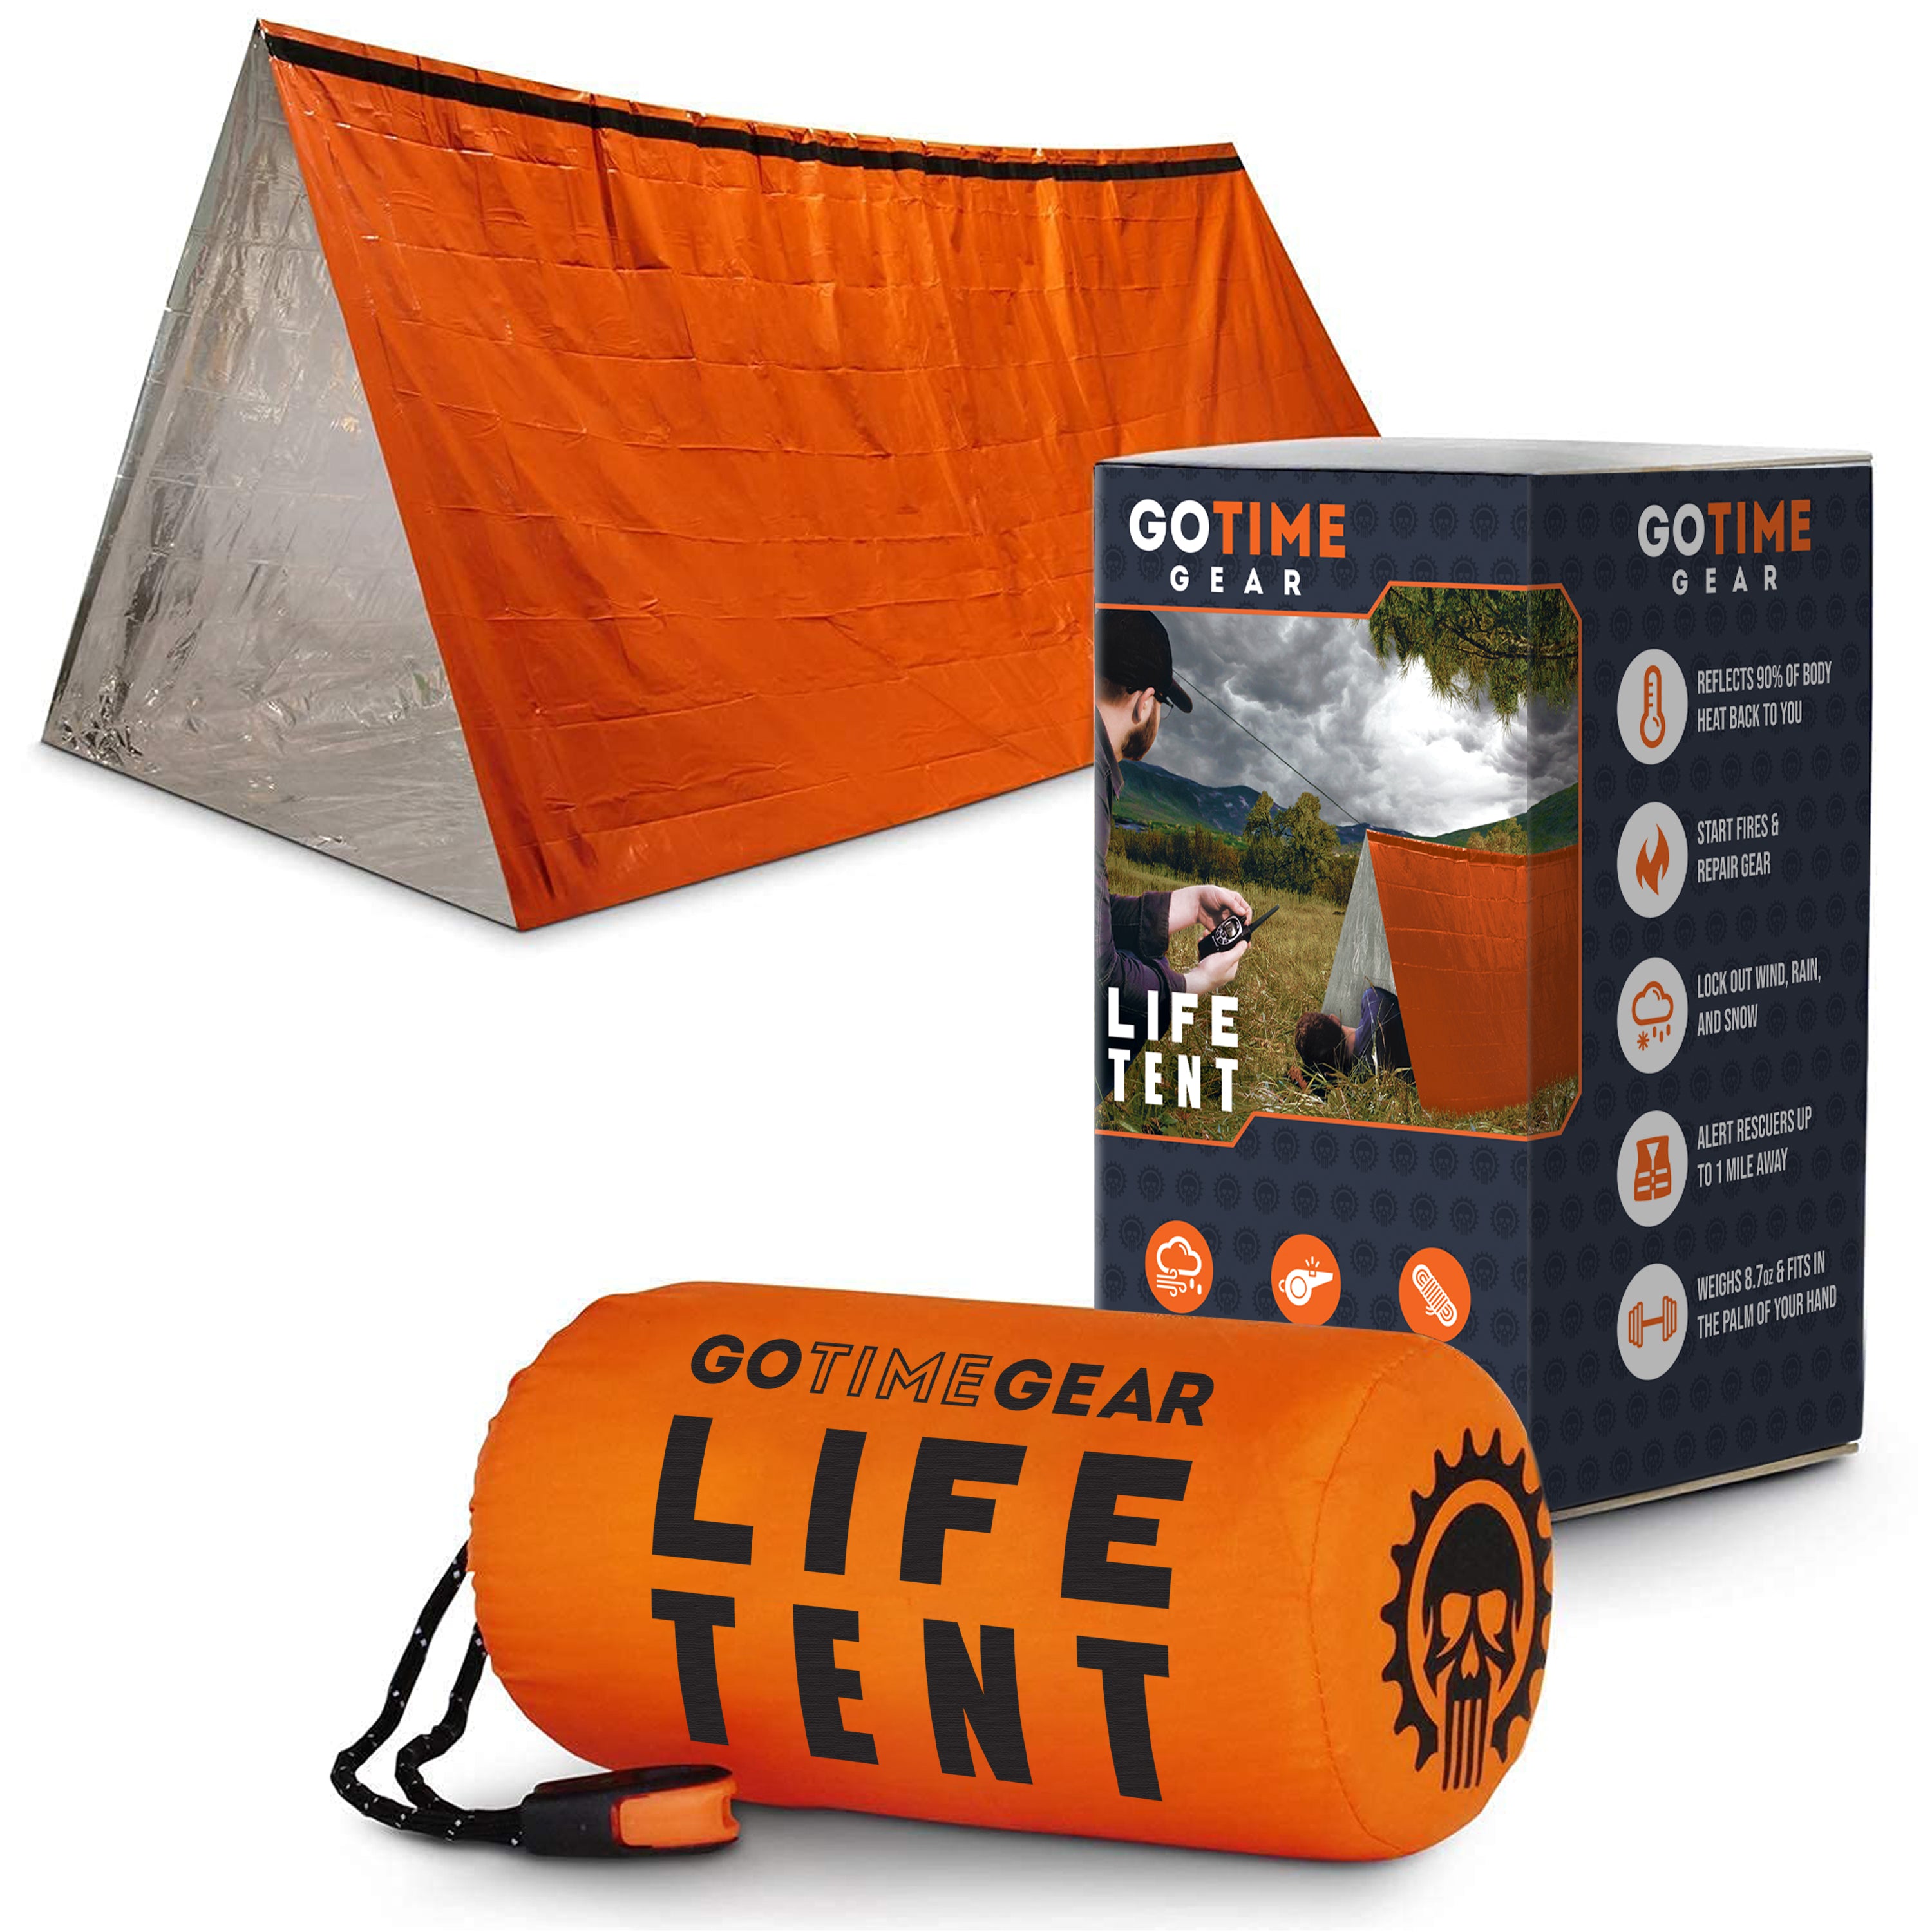 60 in 1 Emergency Survival Gear Kits Outdoor Camping Accessories